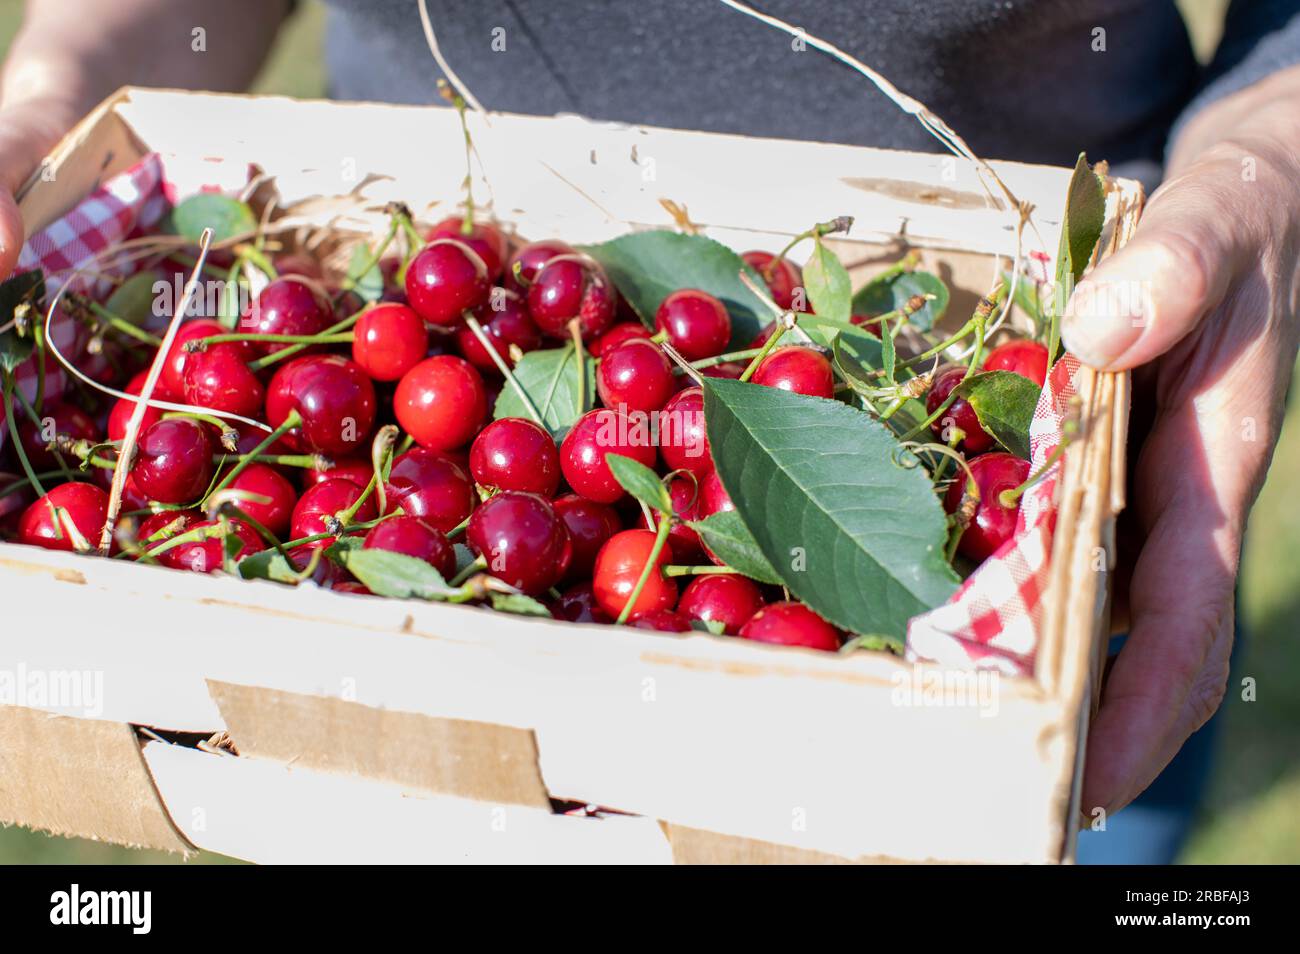 Cherries in a basket holding by a womans hand Stock Photo